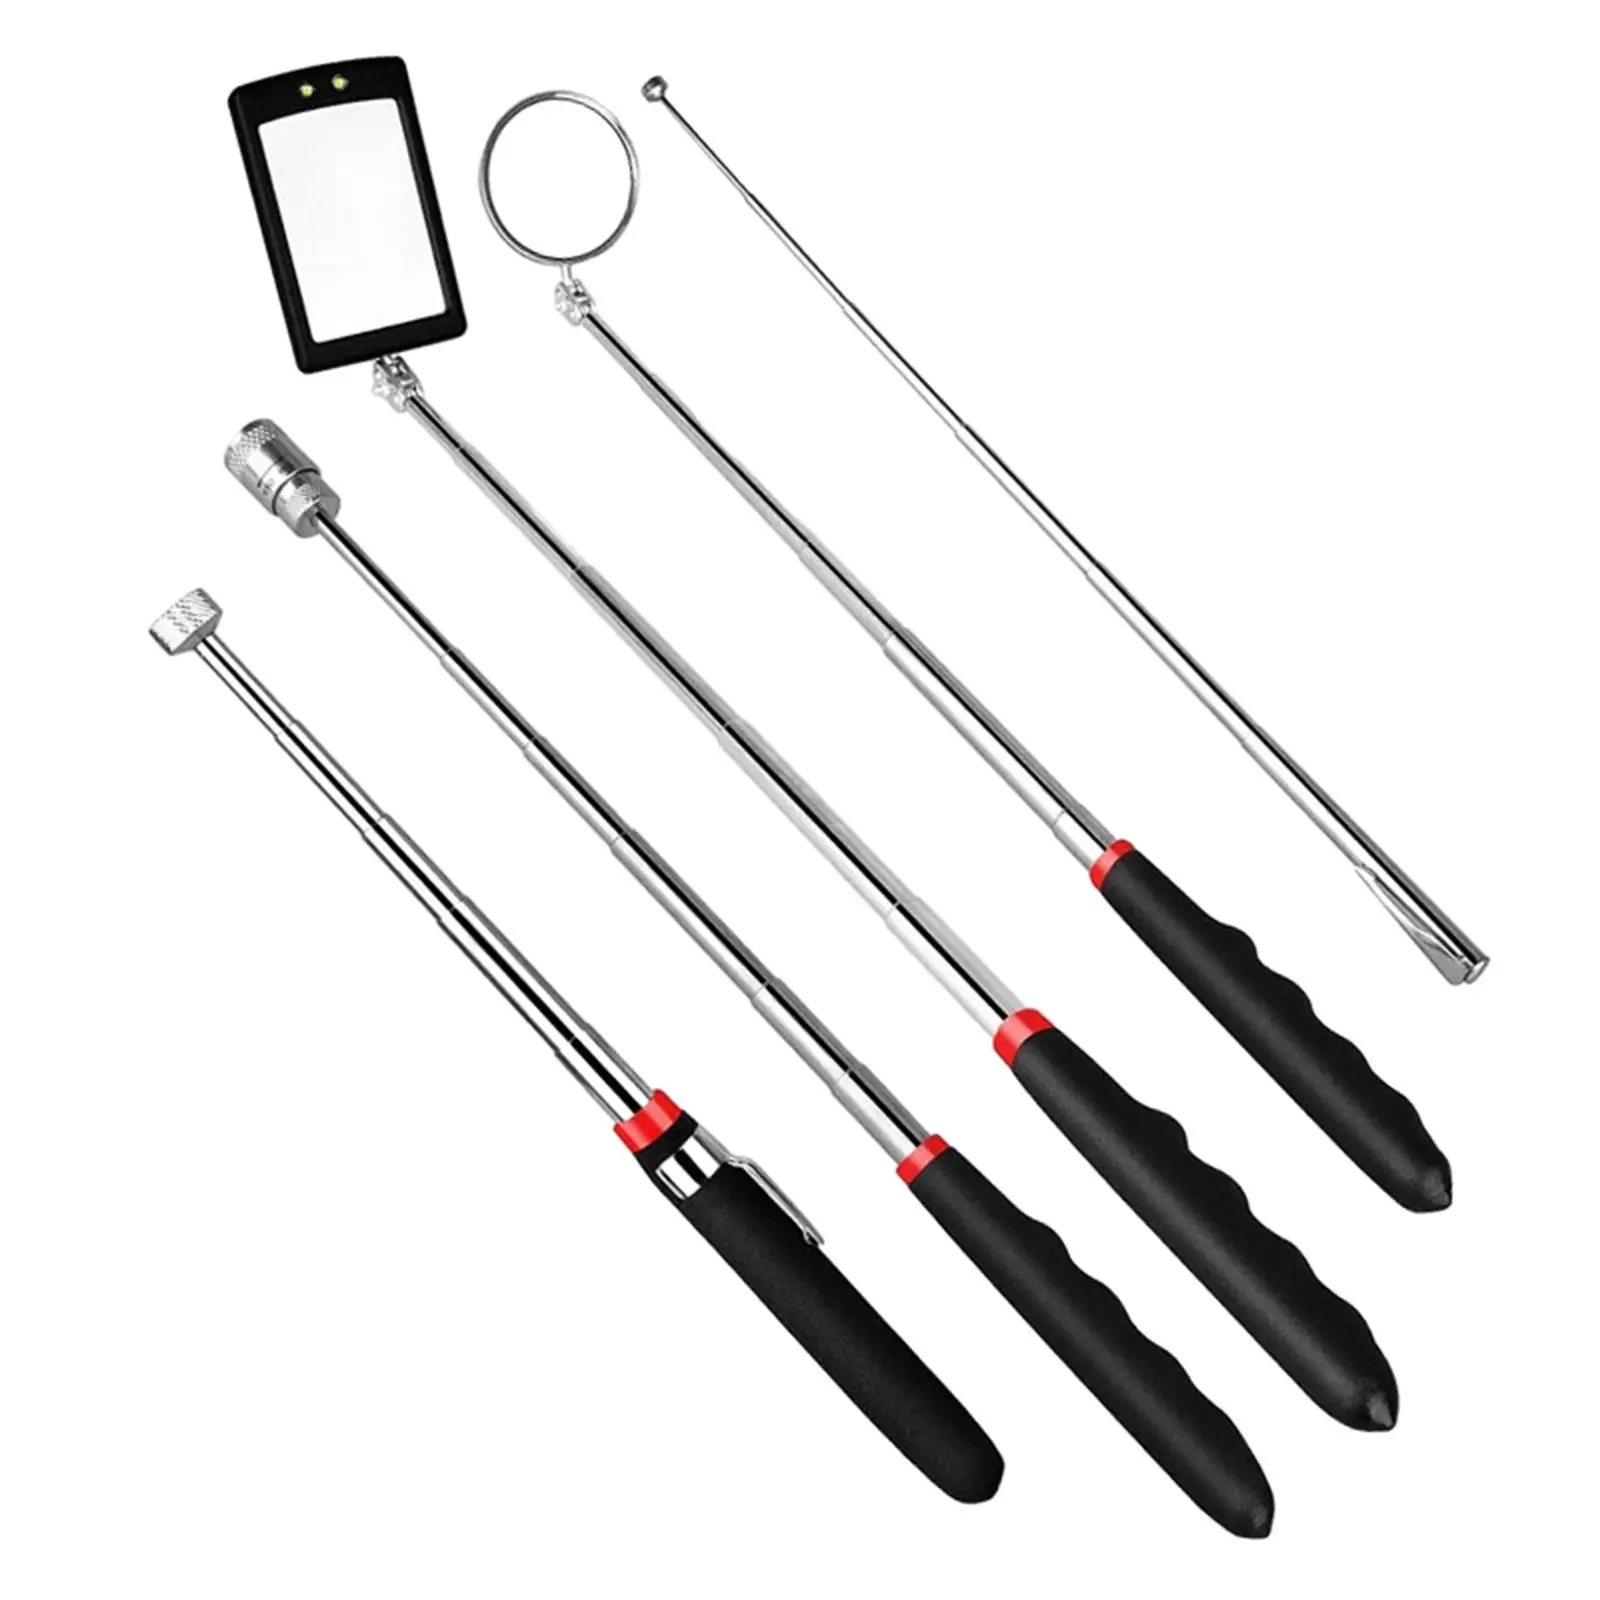 5 Pieces Magnetic Telescoping Grabber Tool 360 Swivel Head Battery Powered Flexible Flashlight for Viewing Pickup Dead Angle